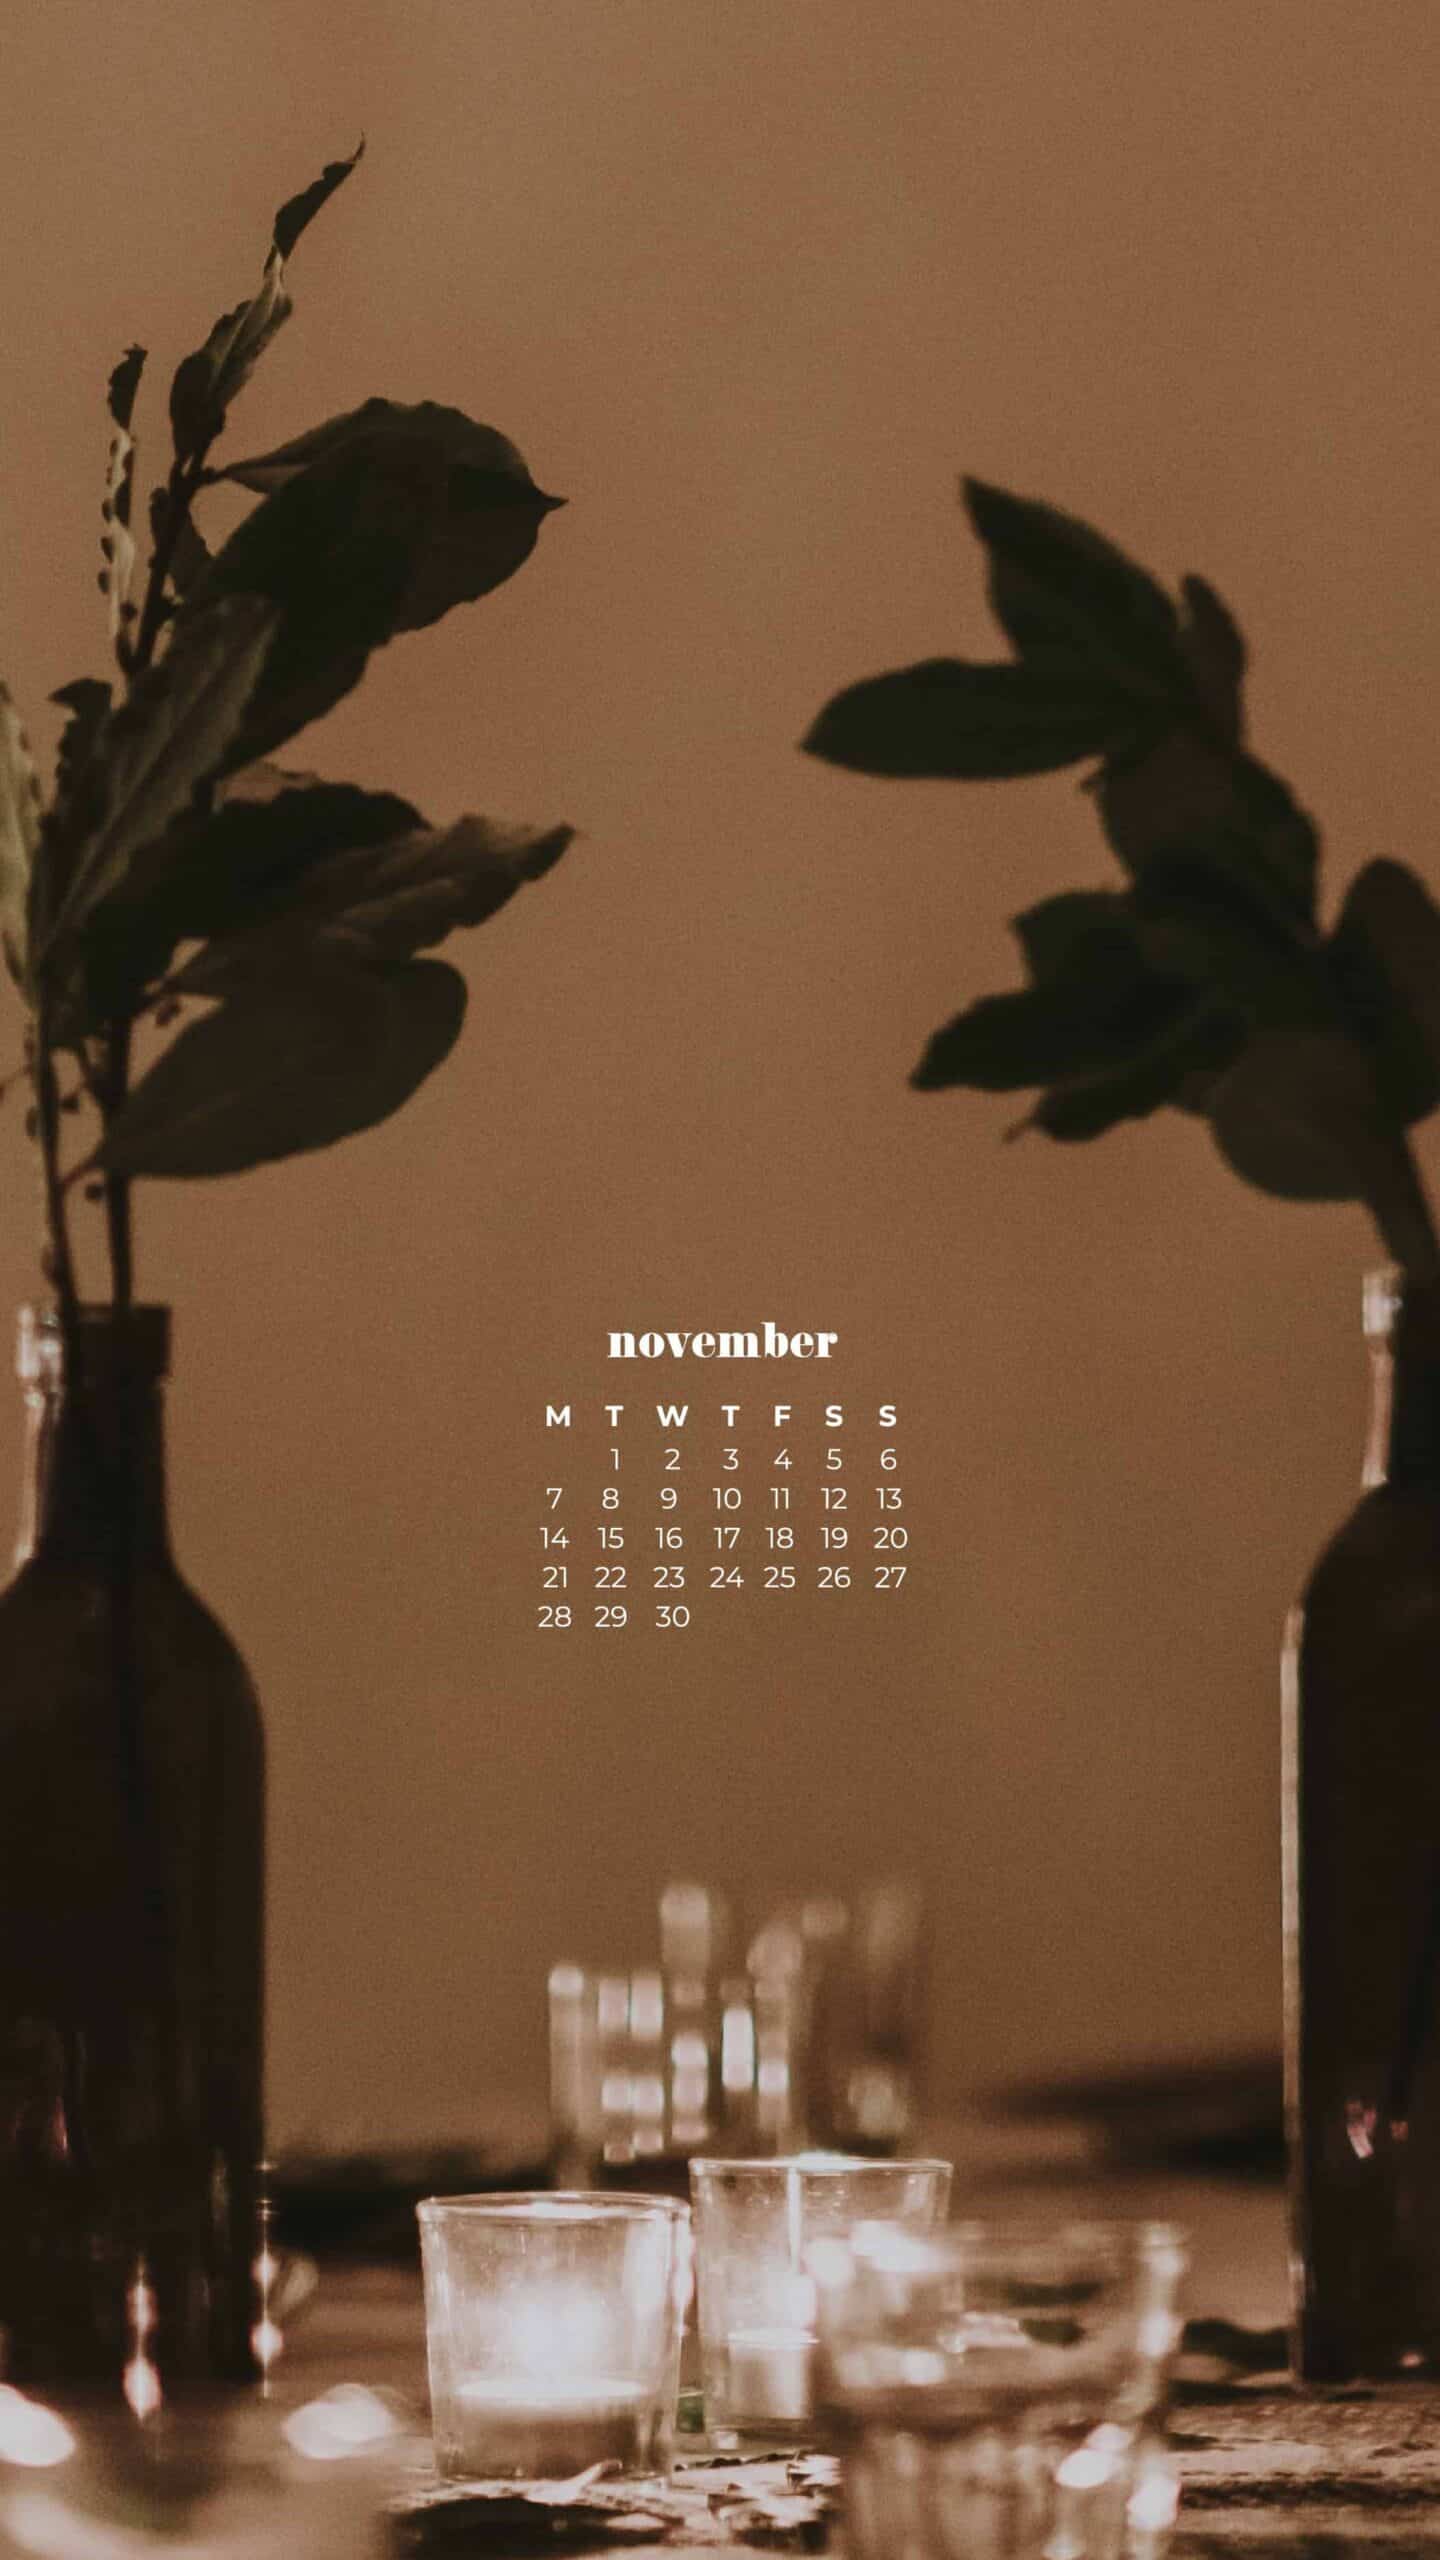 dim thanksgiving shot of a beautiful but simple table scape. tall bottles with greenery in them and clear glassware. Blurry background November 2022 wallpapers – FREE calendars in Sunday & Monday starts + no-calendar designs. 59 beautiful options for desktop & smart phones!